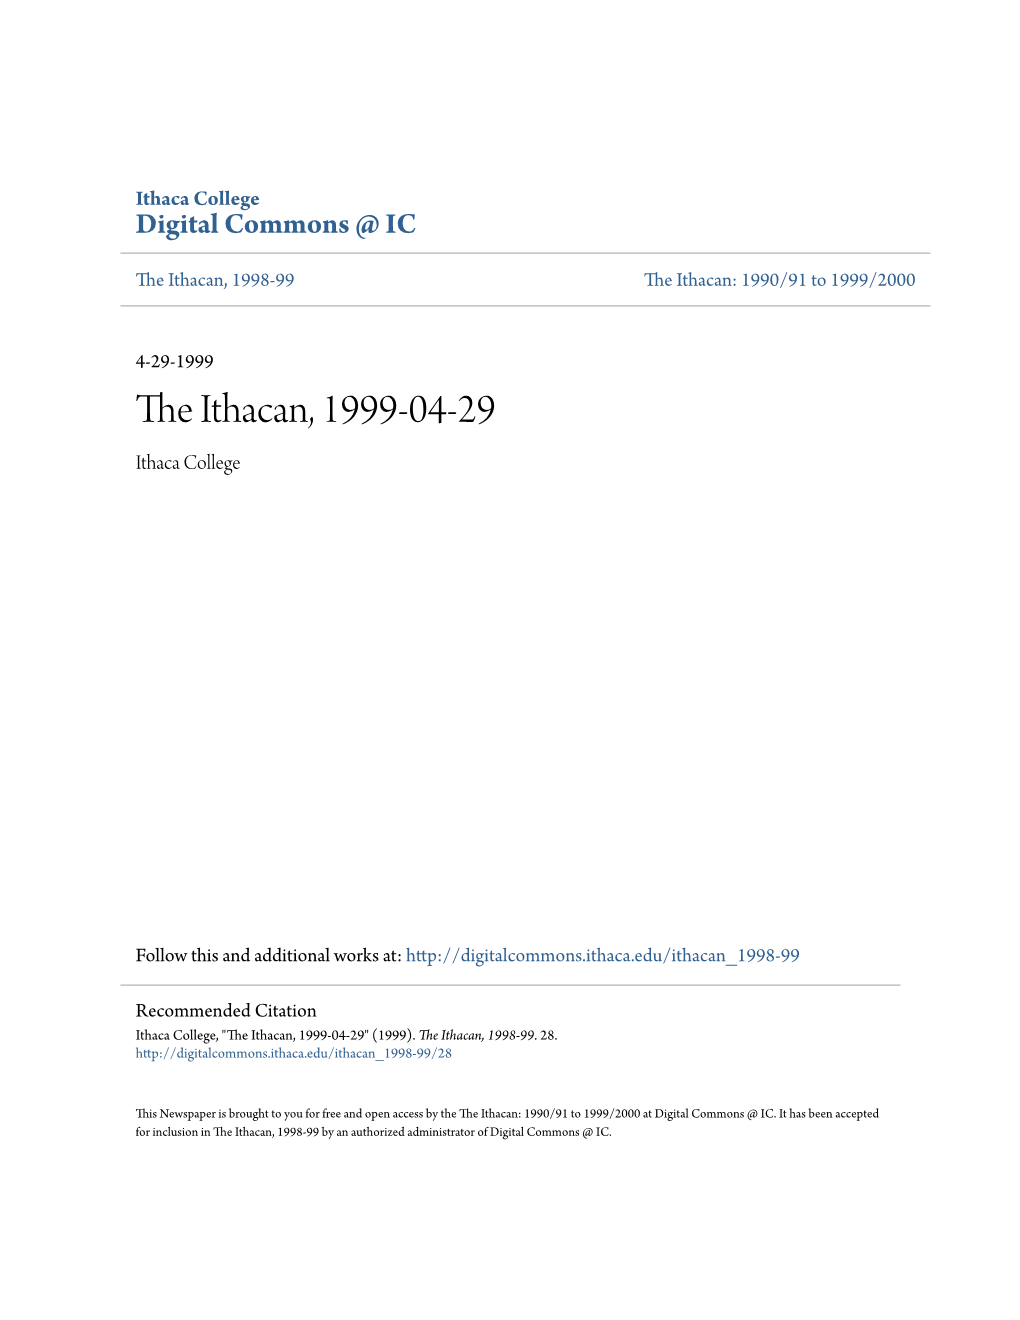 The Ithacan, 1999-04-29